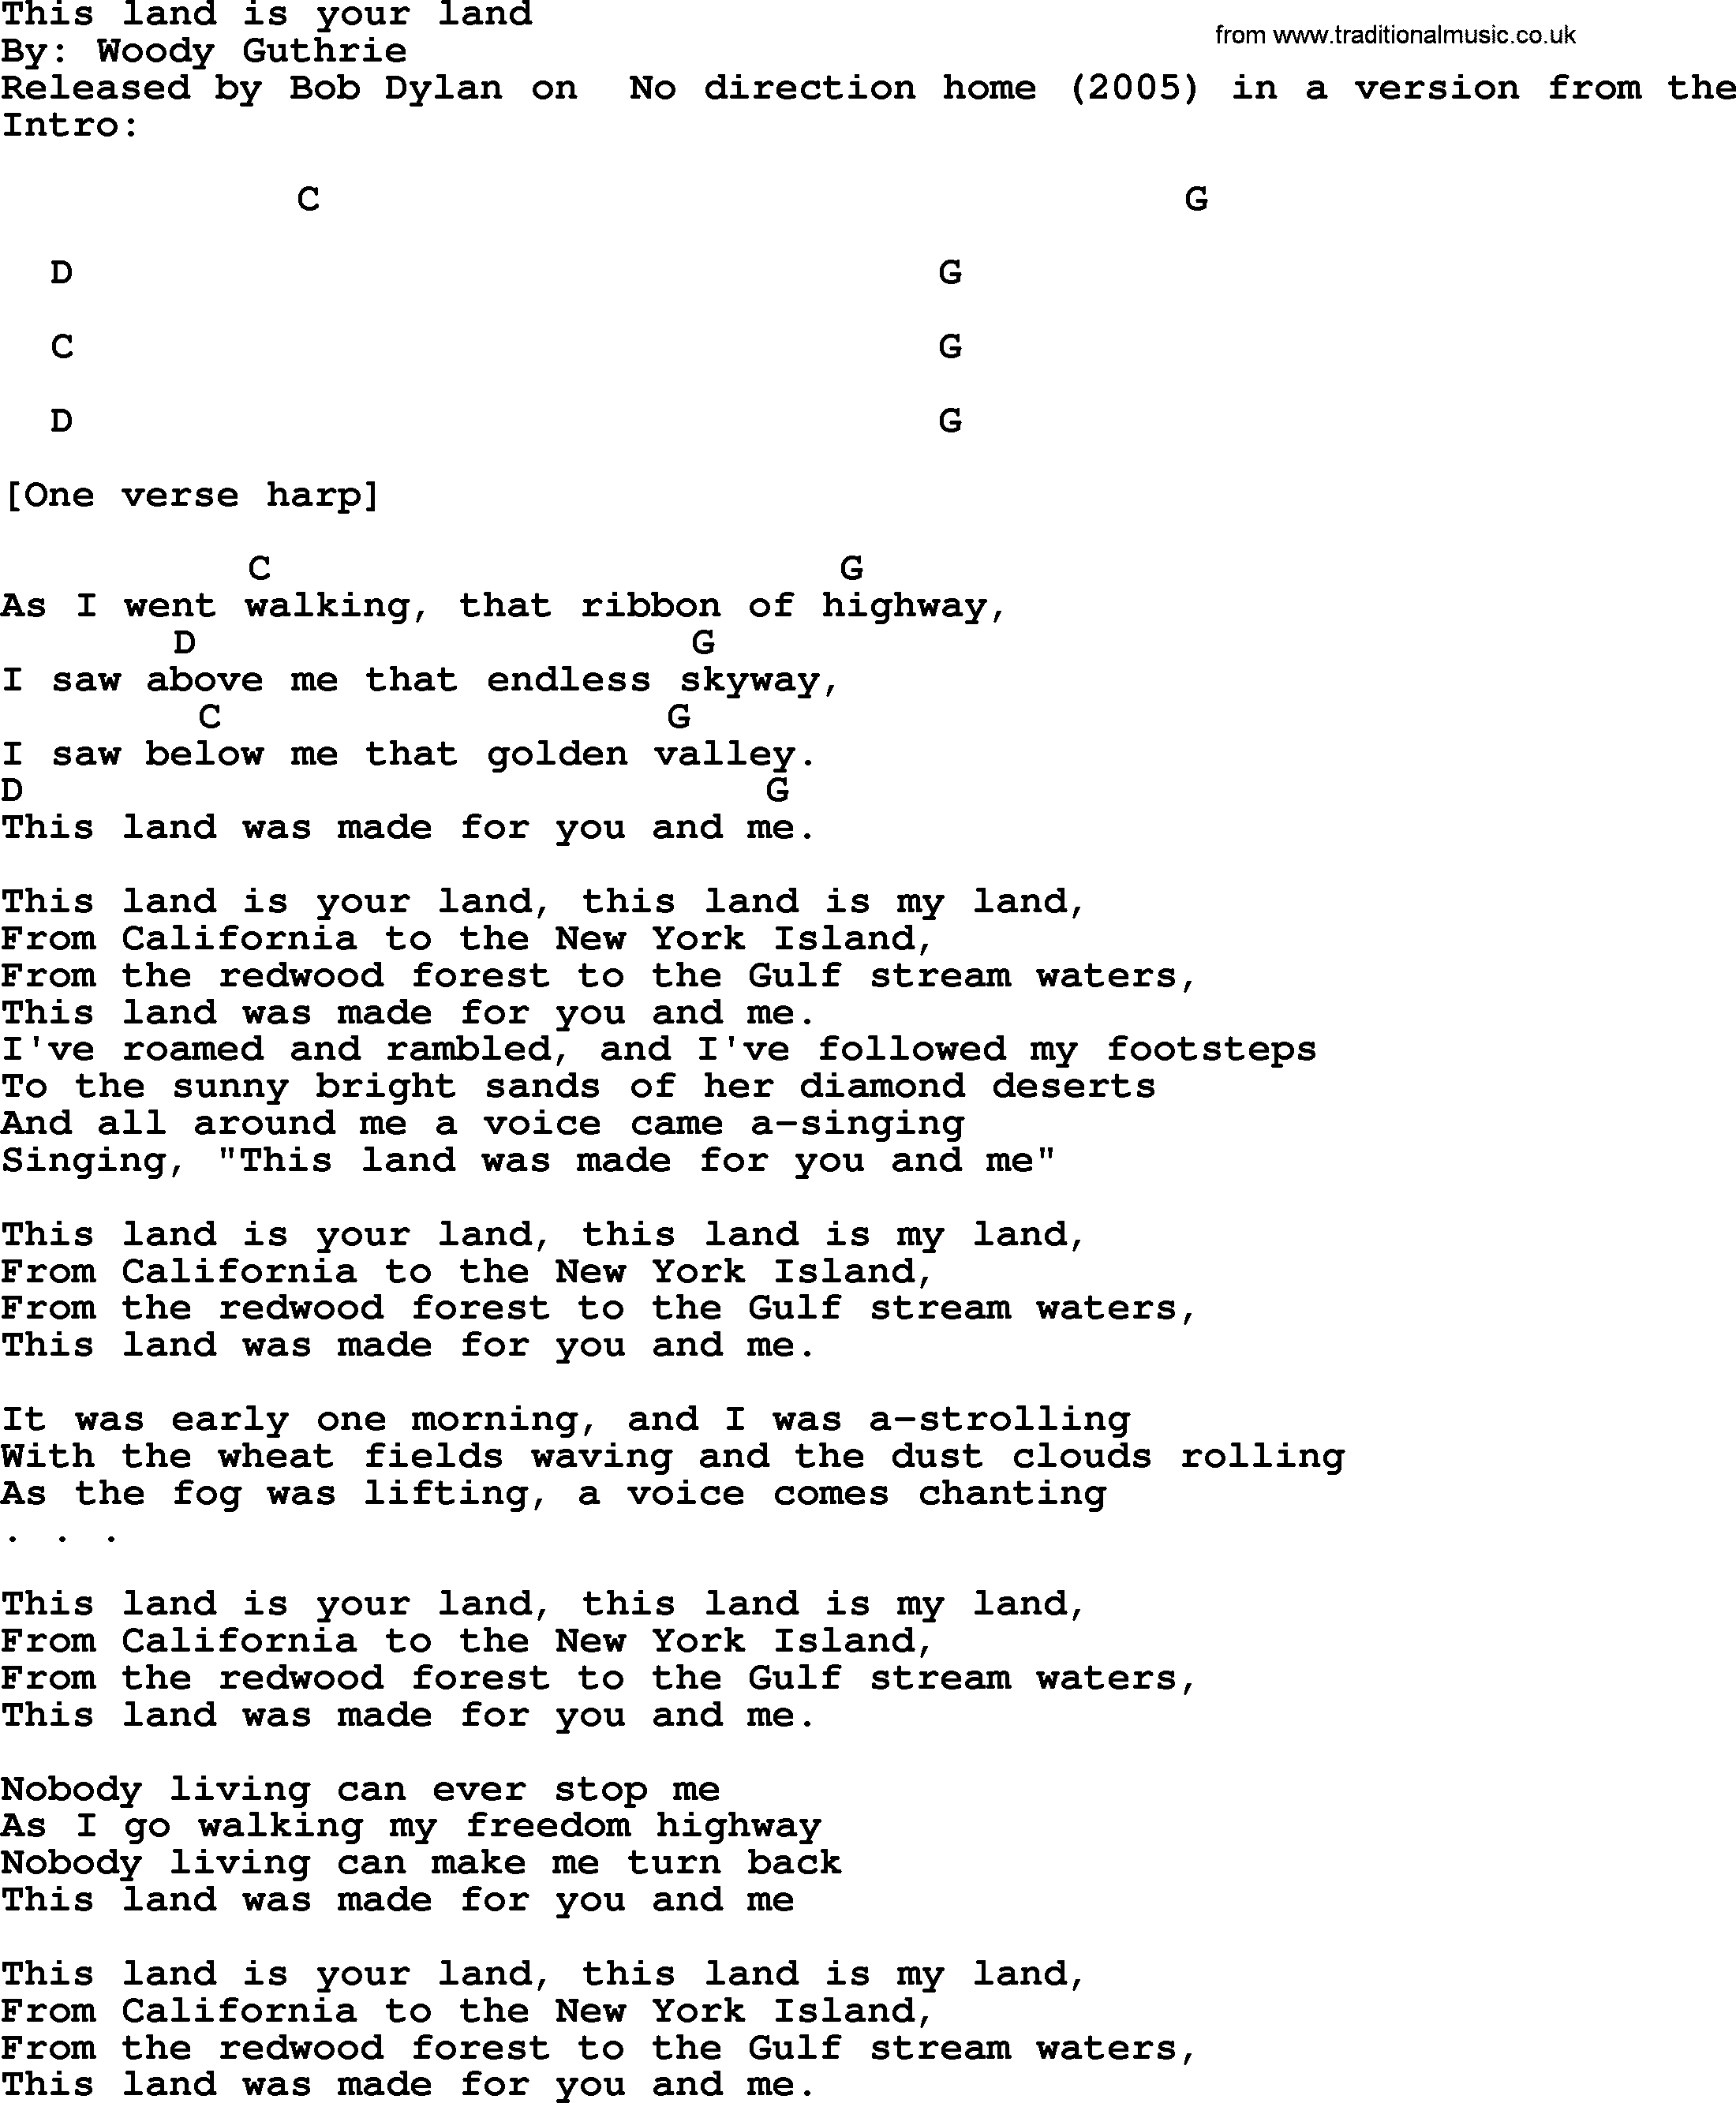 Bob Dylan song, lyrics with chords - This land is your land